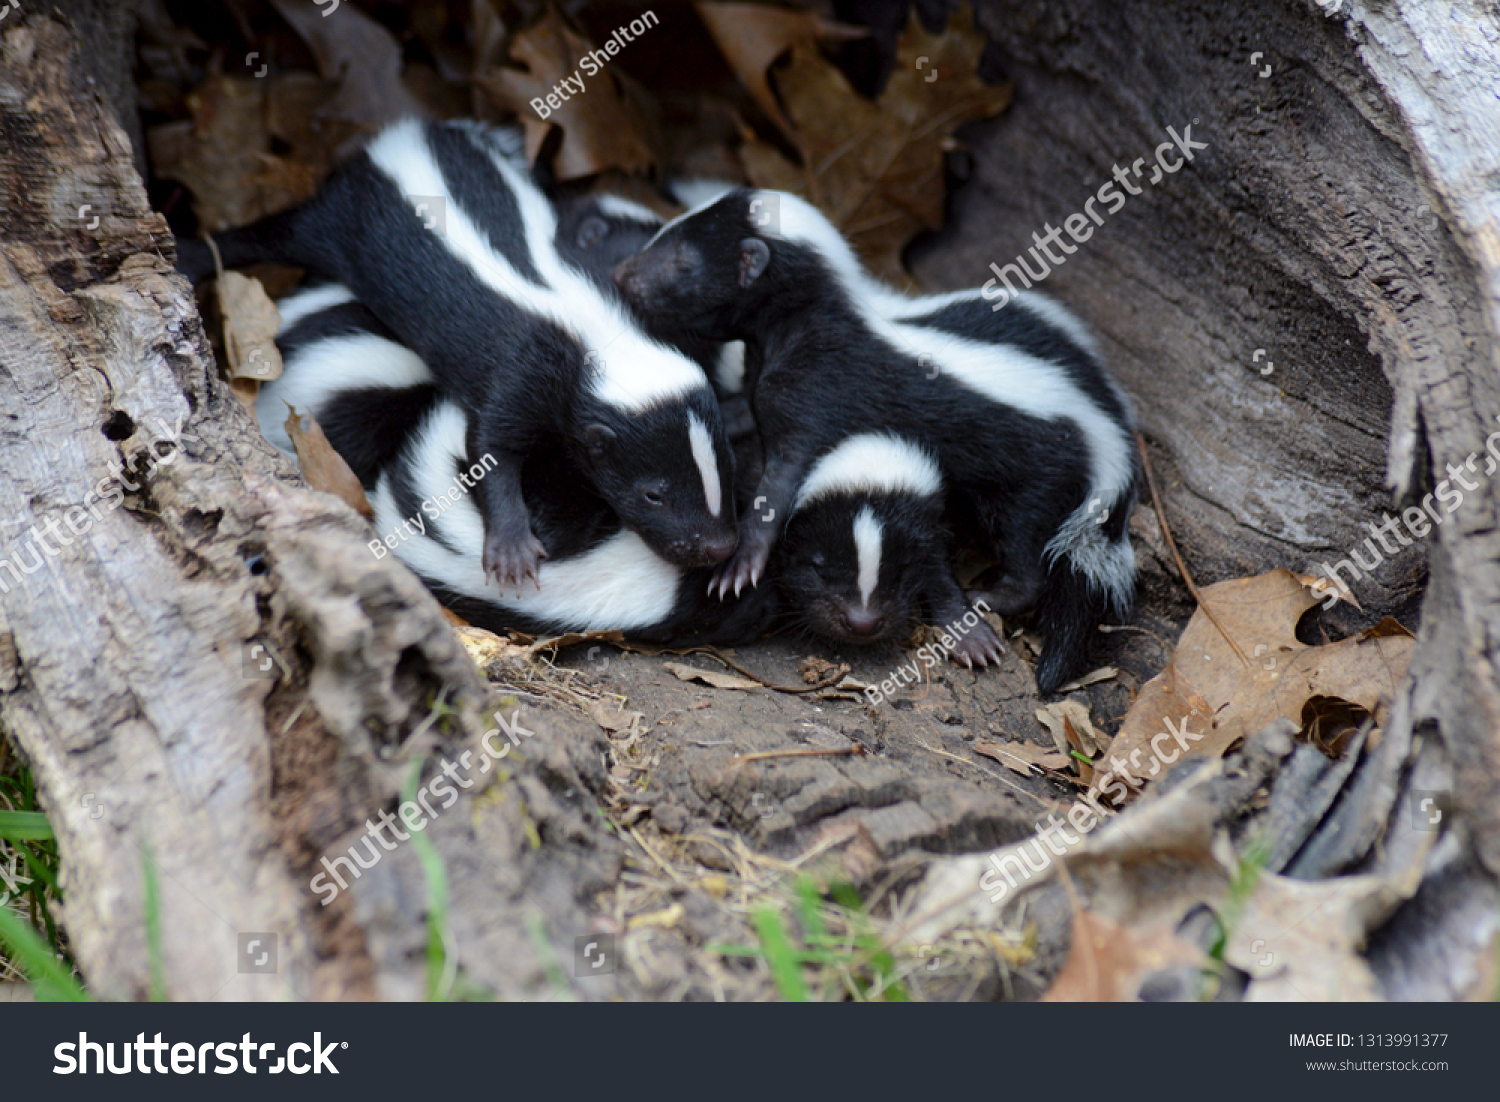 A family of skunk babies in a hollow log. #1313991377